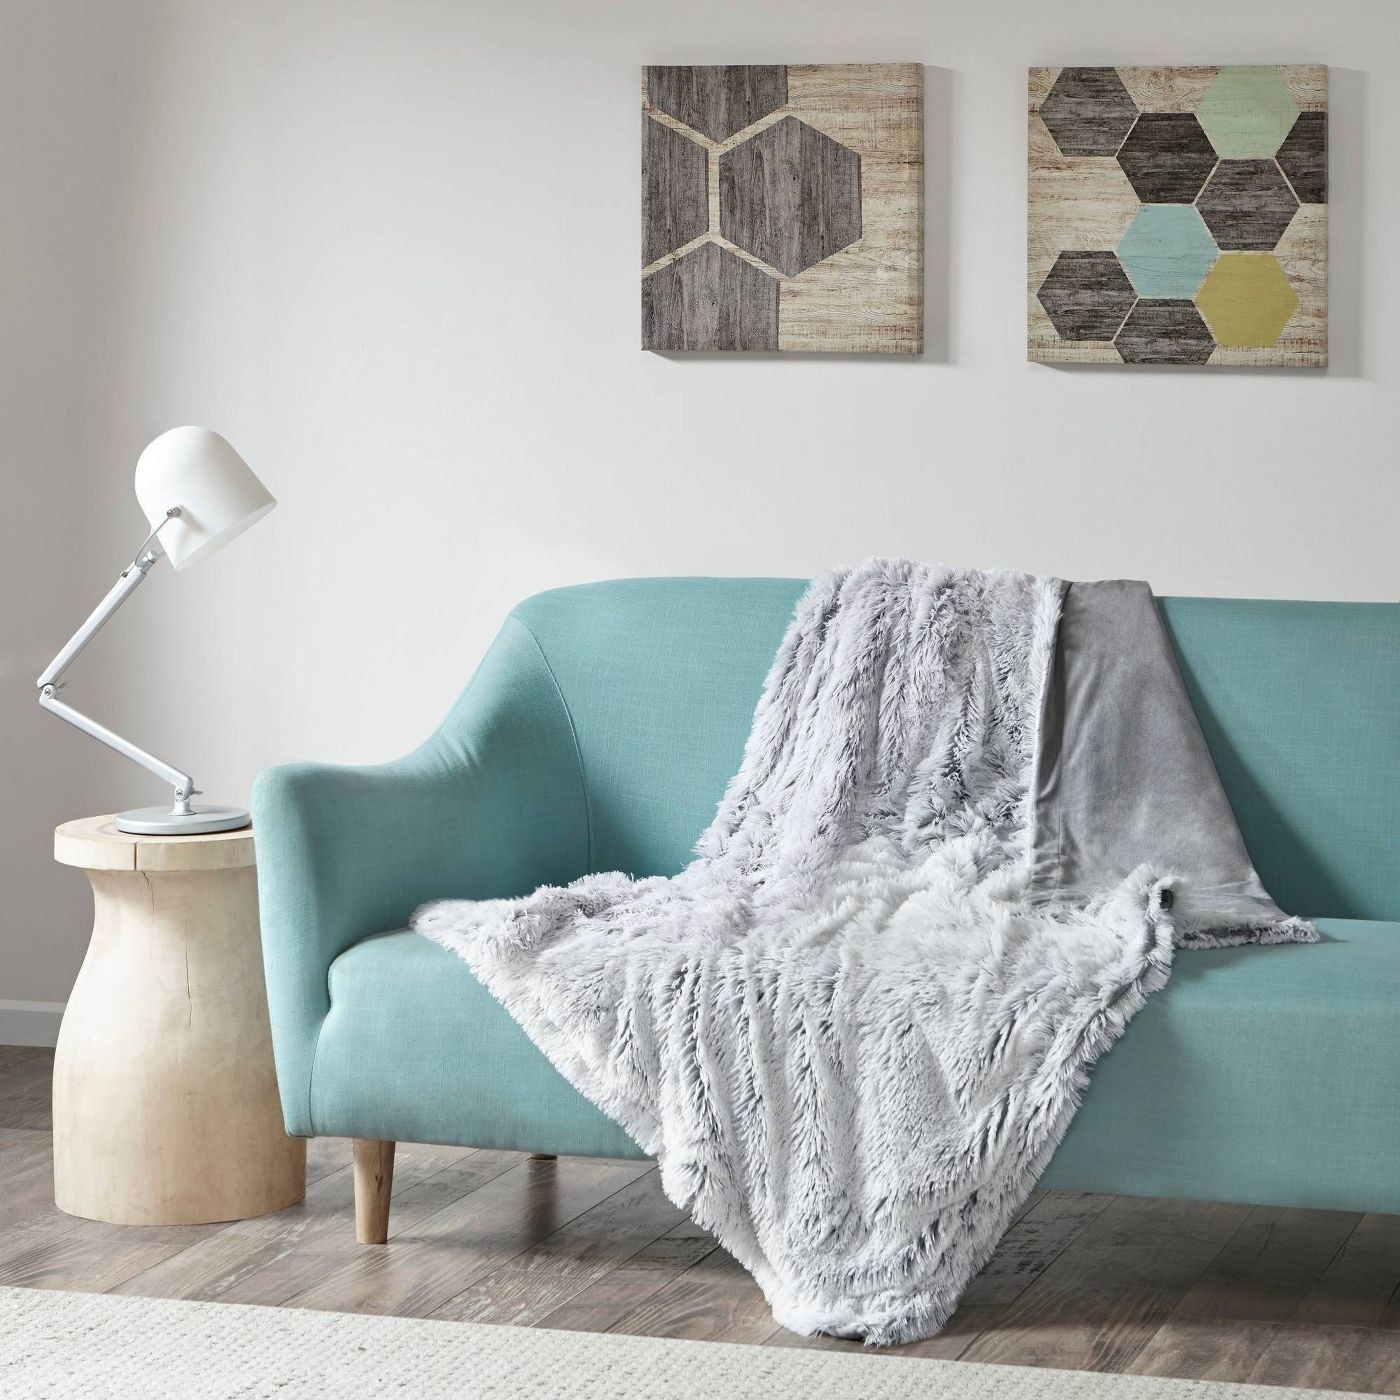 The faux fur throw in gray draped over a couch